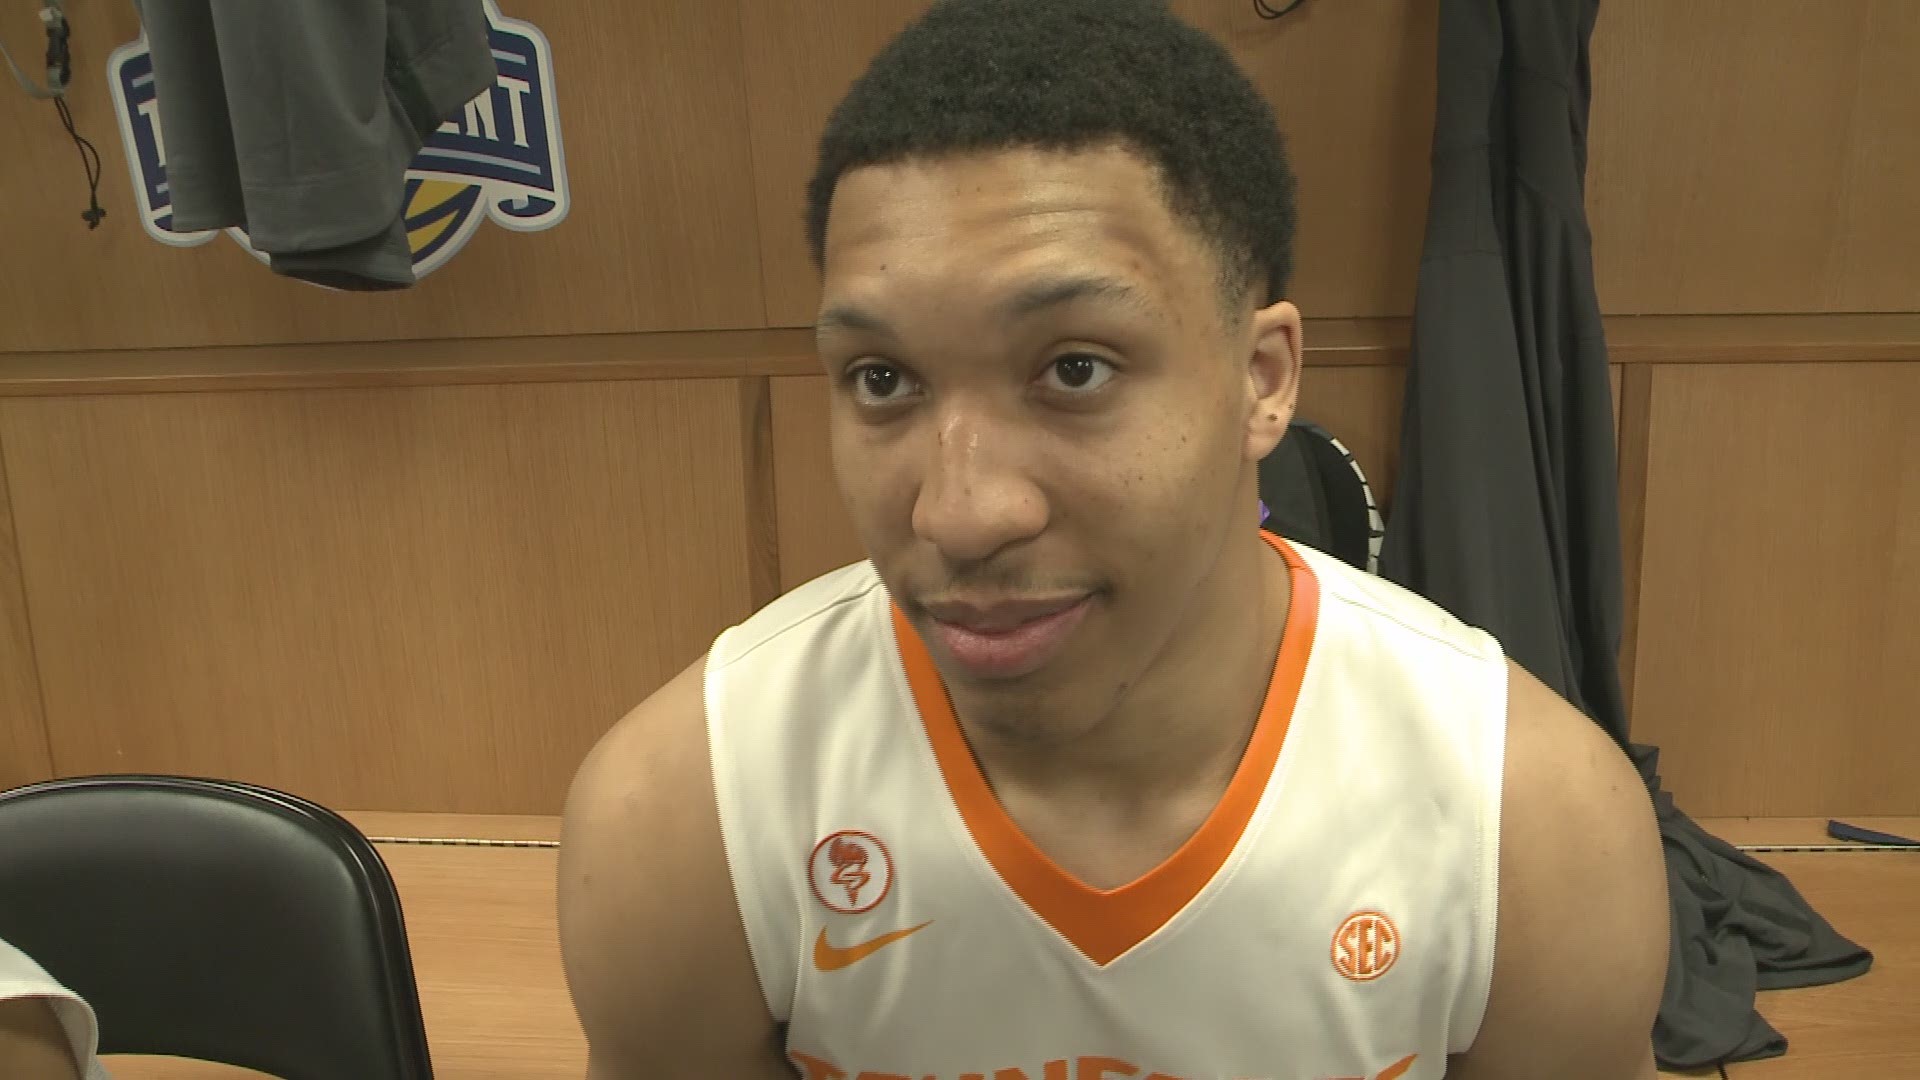 SEC Player of the Year Grant Williams talks to the media after the Vols beat Arkansas to advance to the SEC tournament championship game.